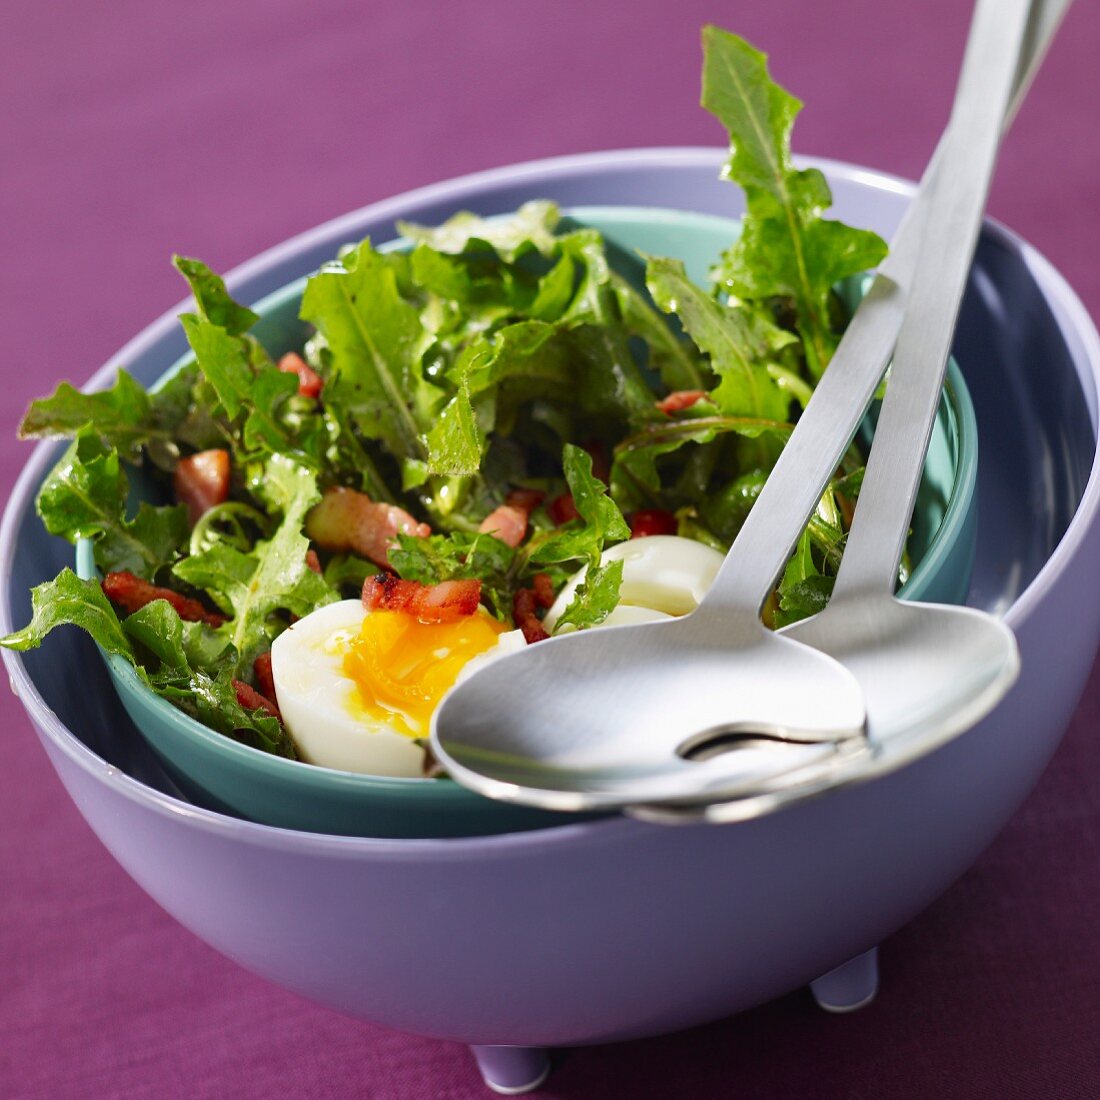 Dandelion and diced bacon salad with a soft-boiled egg